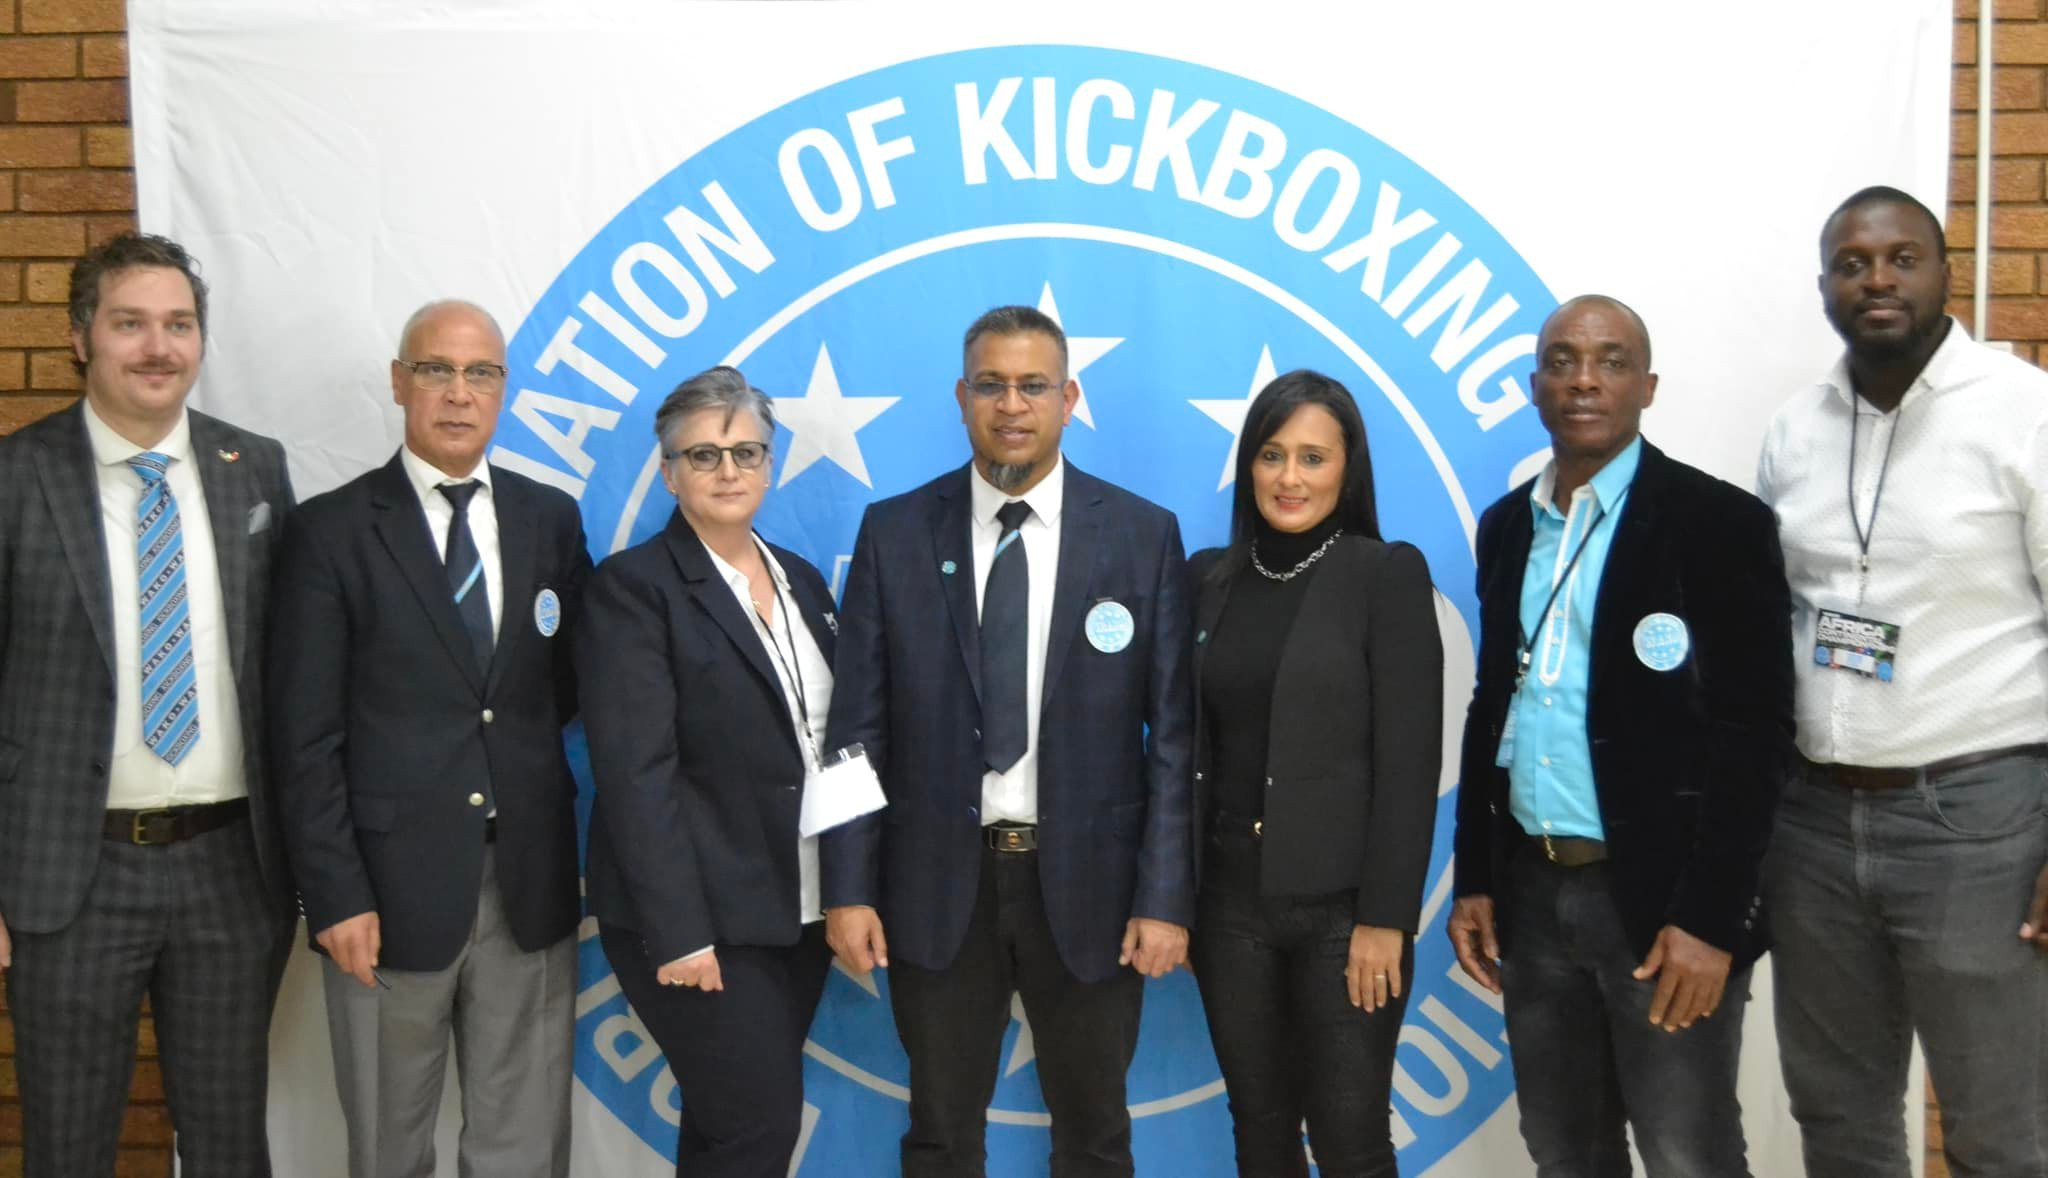 Aslam Mahomed, centre, is also the President of South African Kickboxing Association ©WAKO Africa